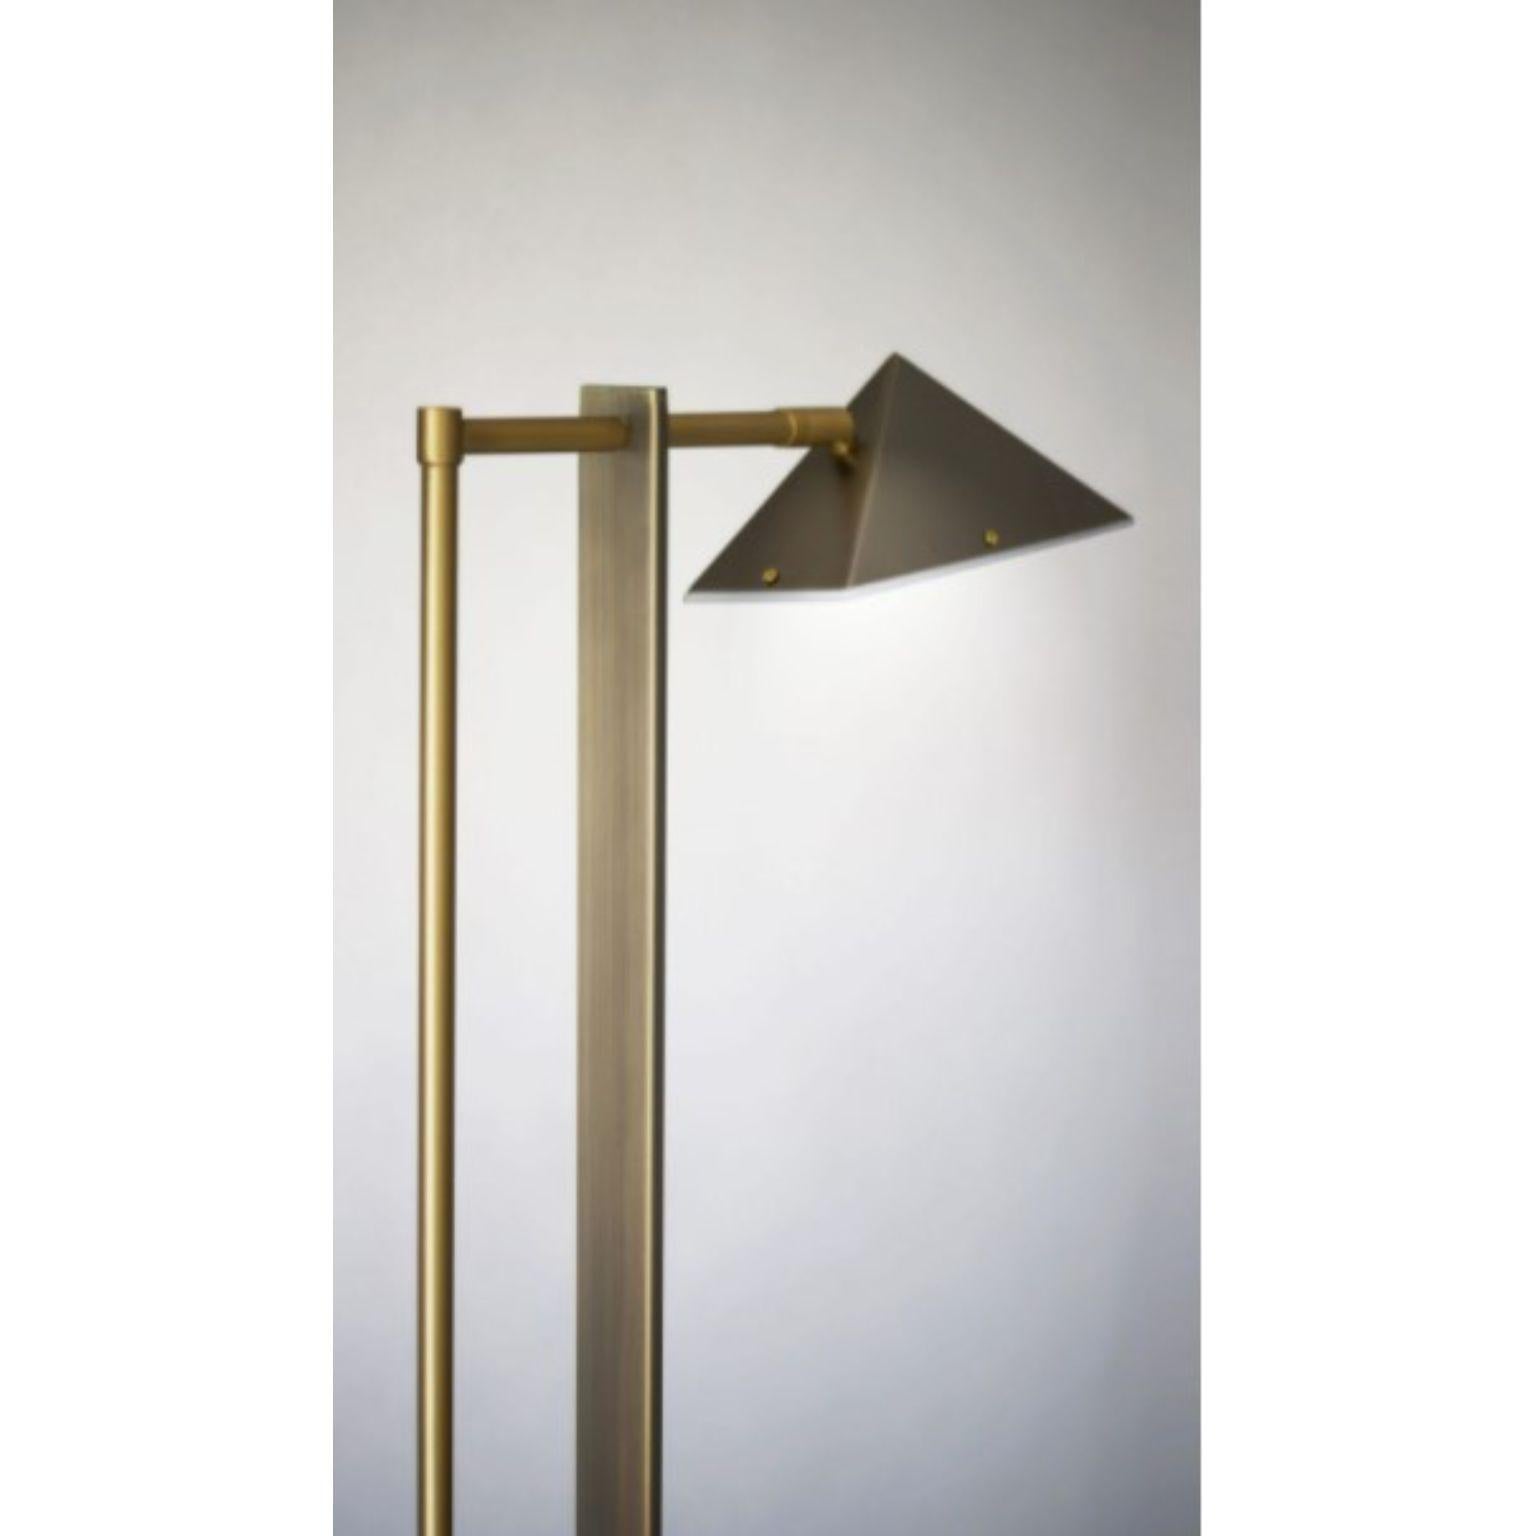 British Marble and Wedge Floor Lamp by Square in Circle